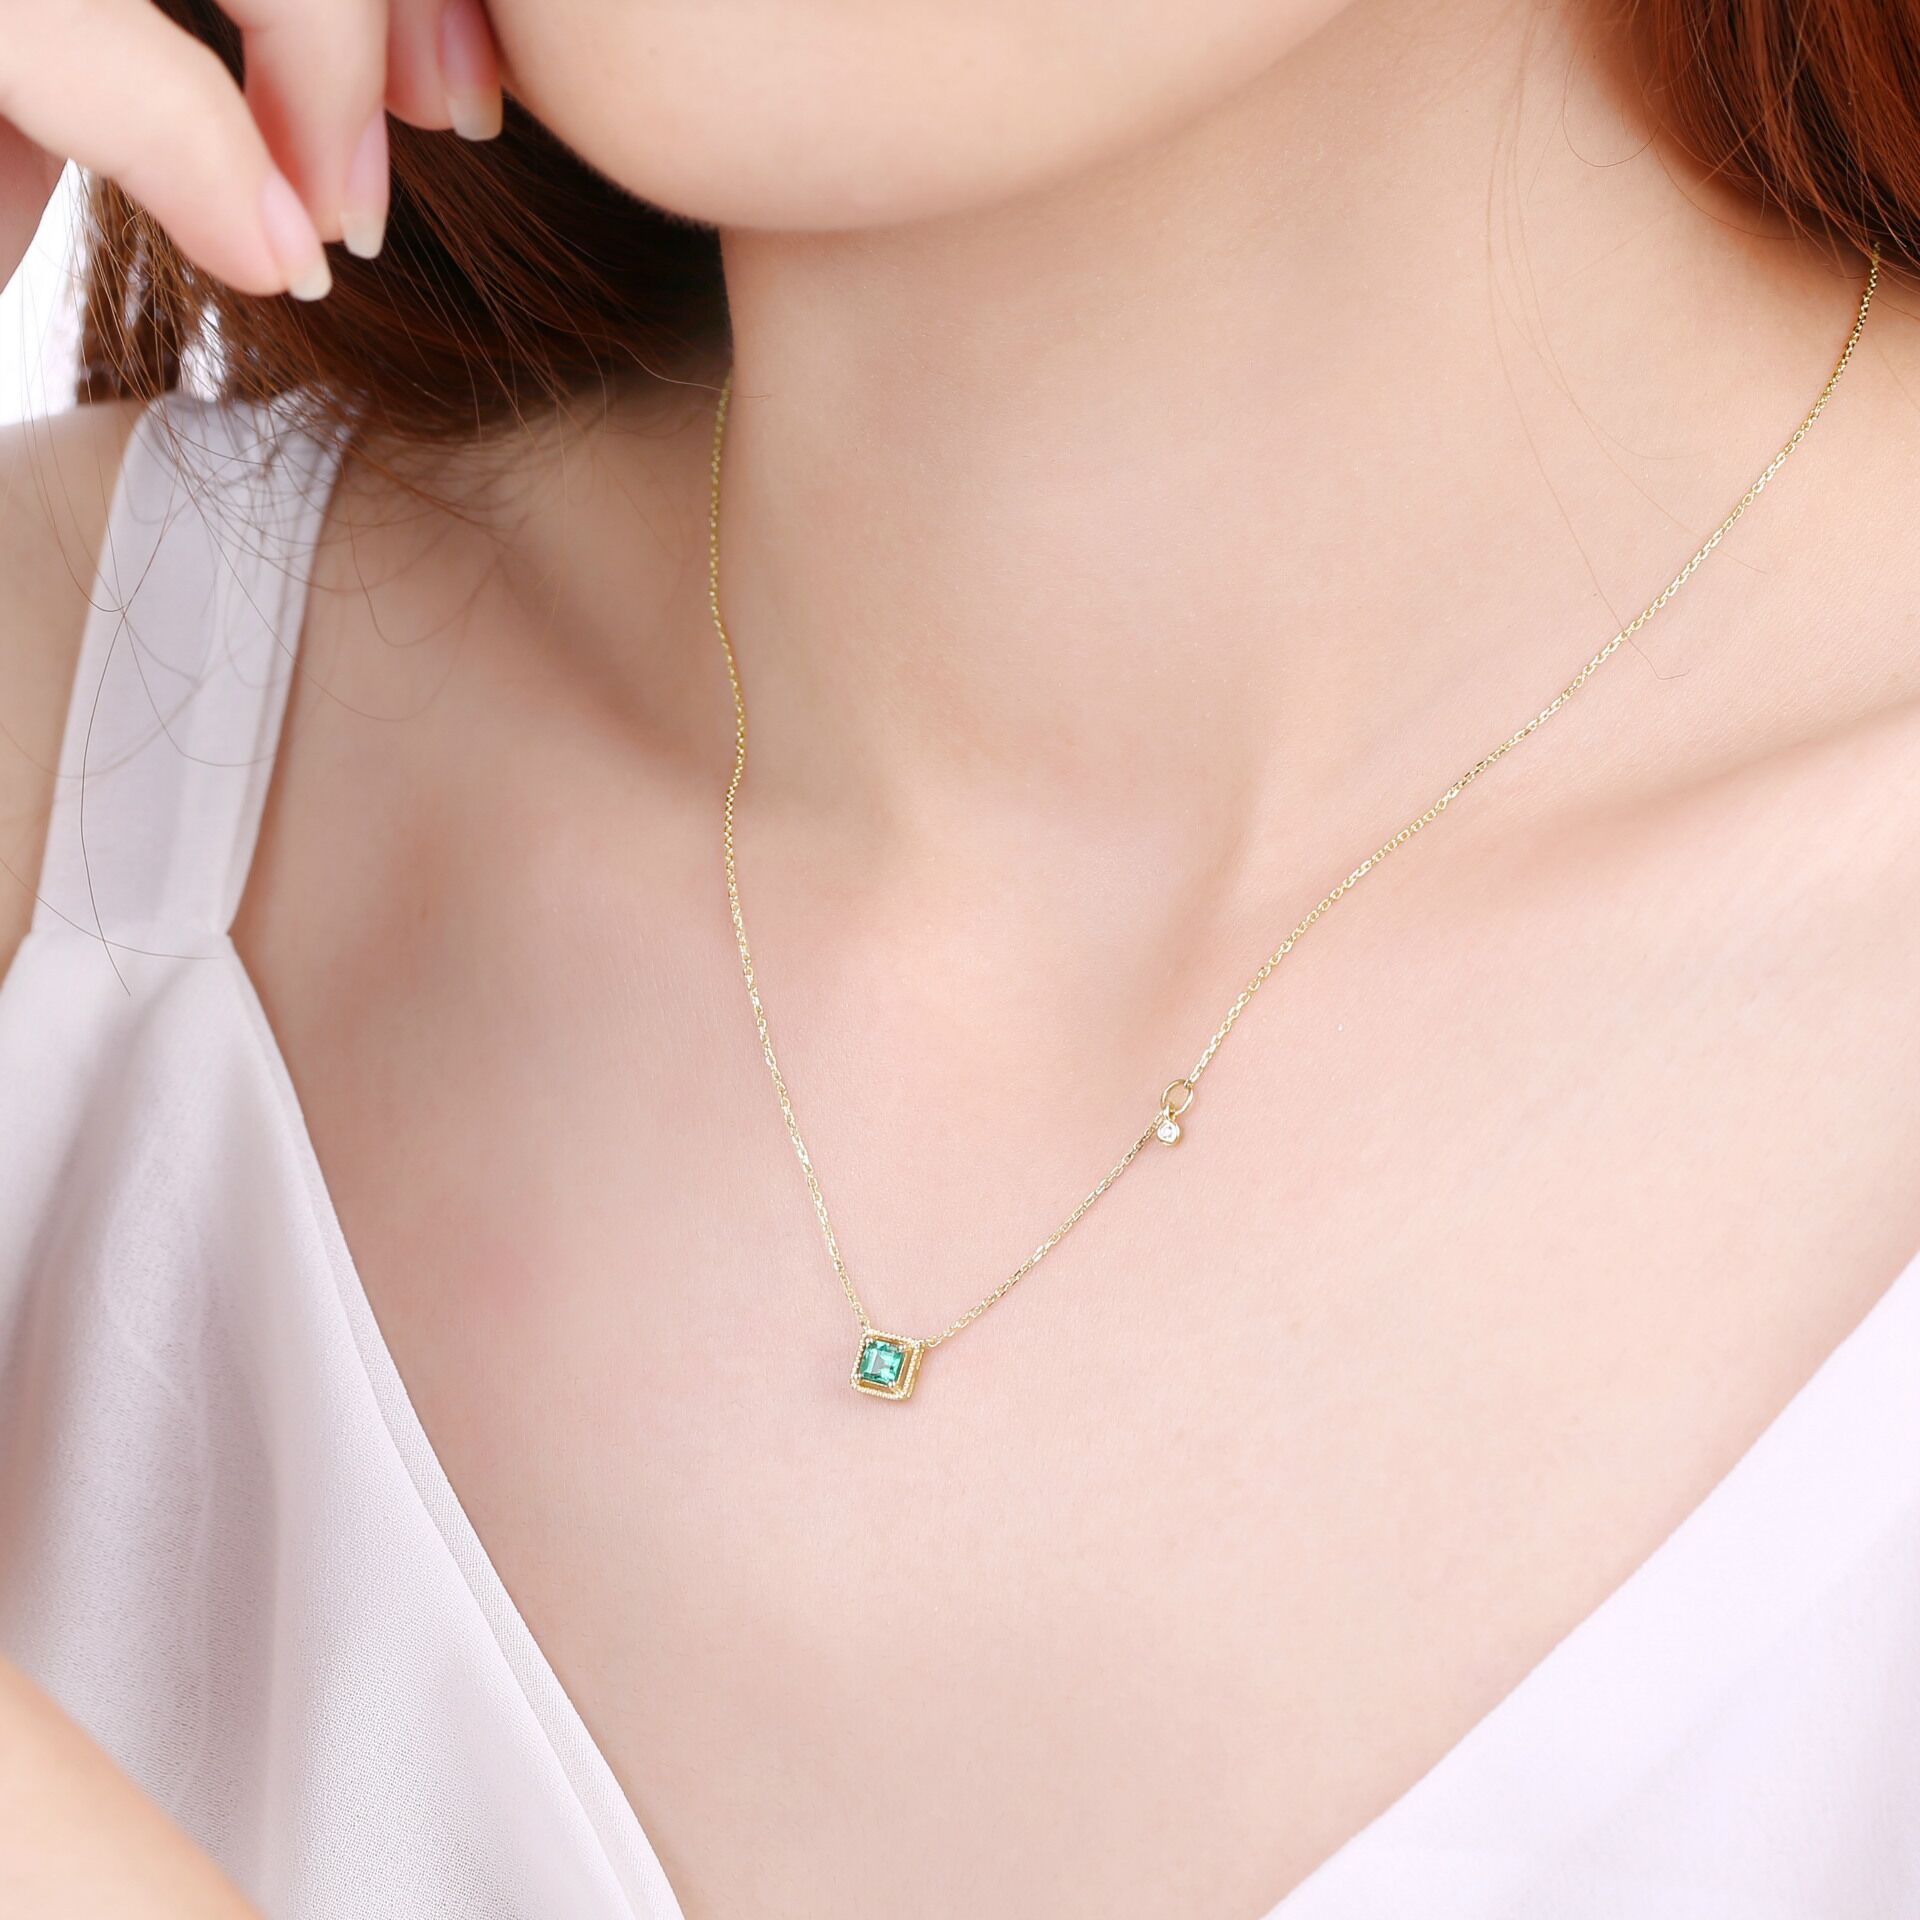 Ladies Retro Emerald Necklace With 14K Yellow Gold